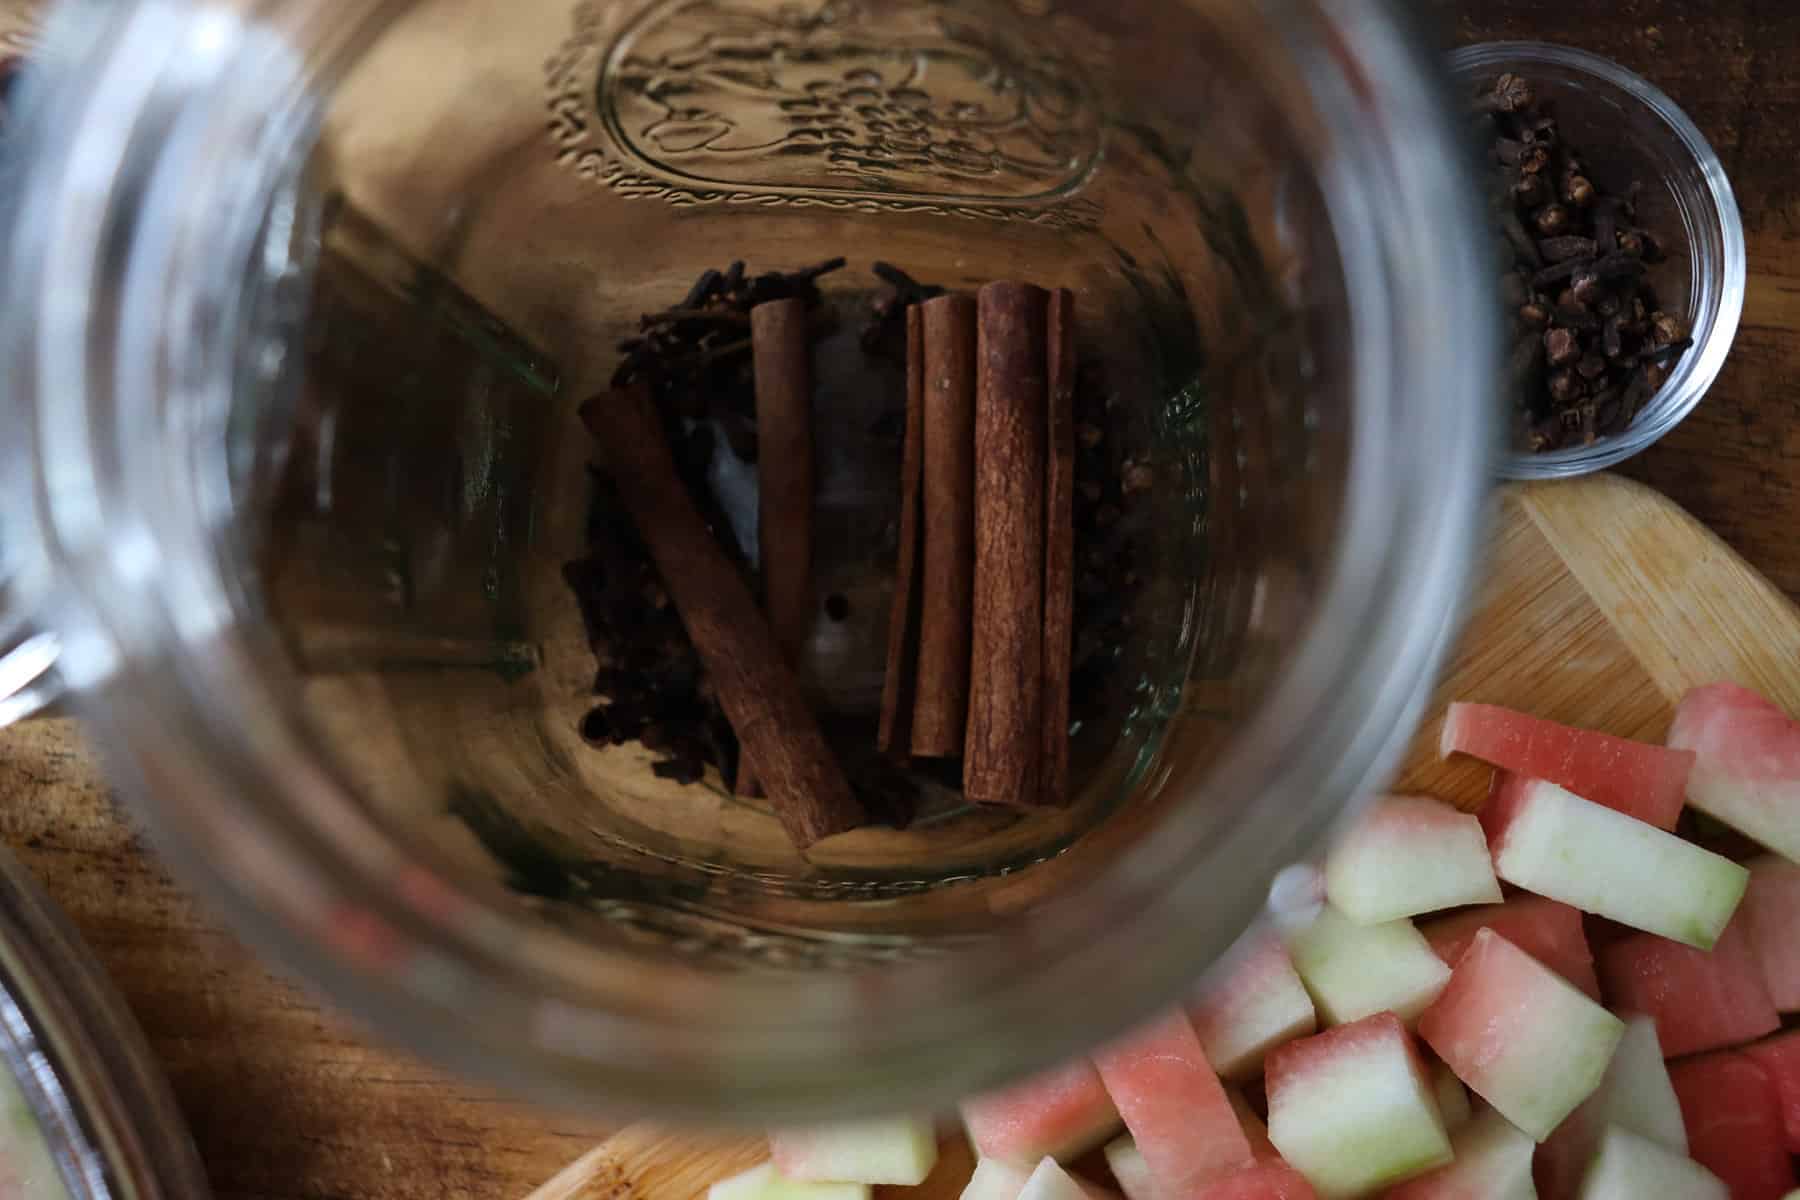 cinnamon sticks and whole cloves in a jar